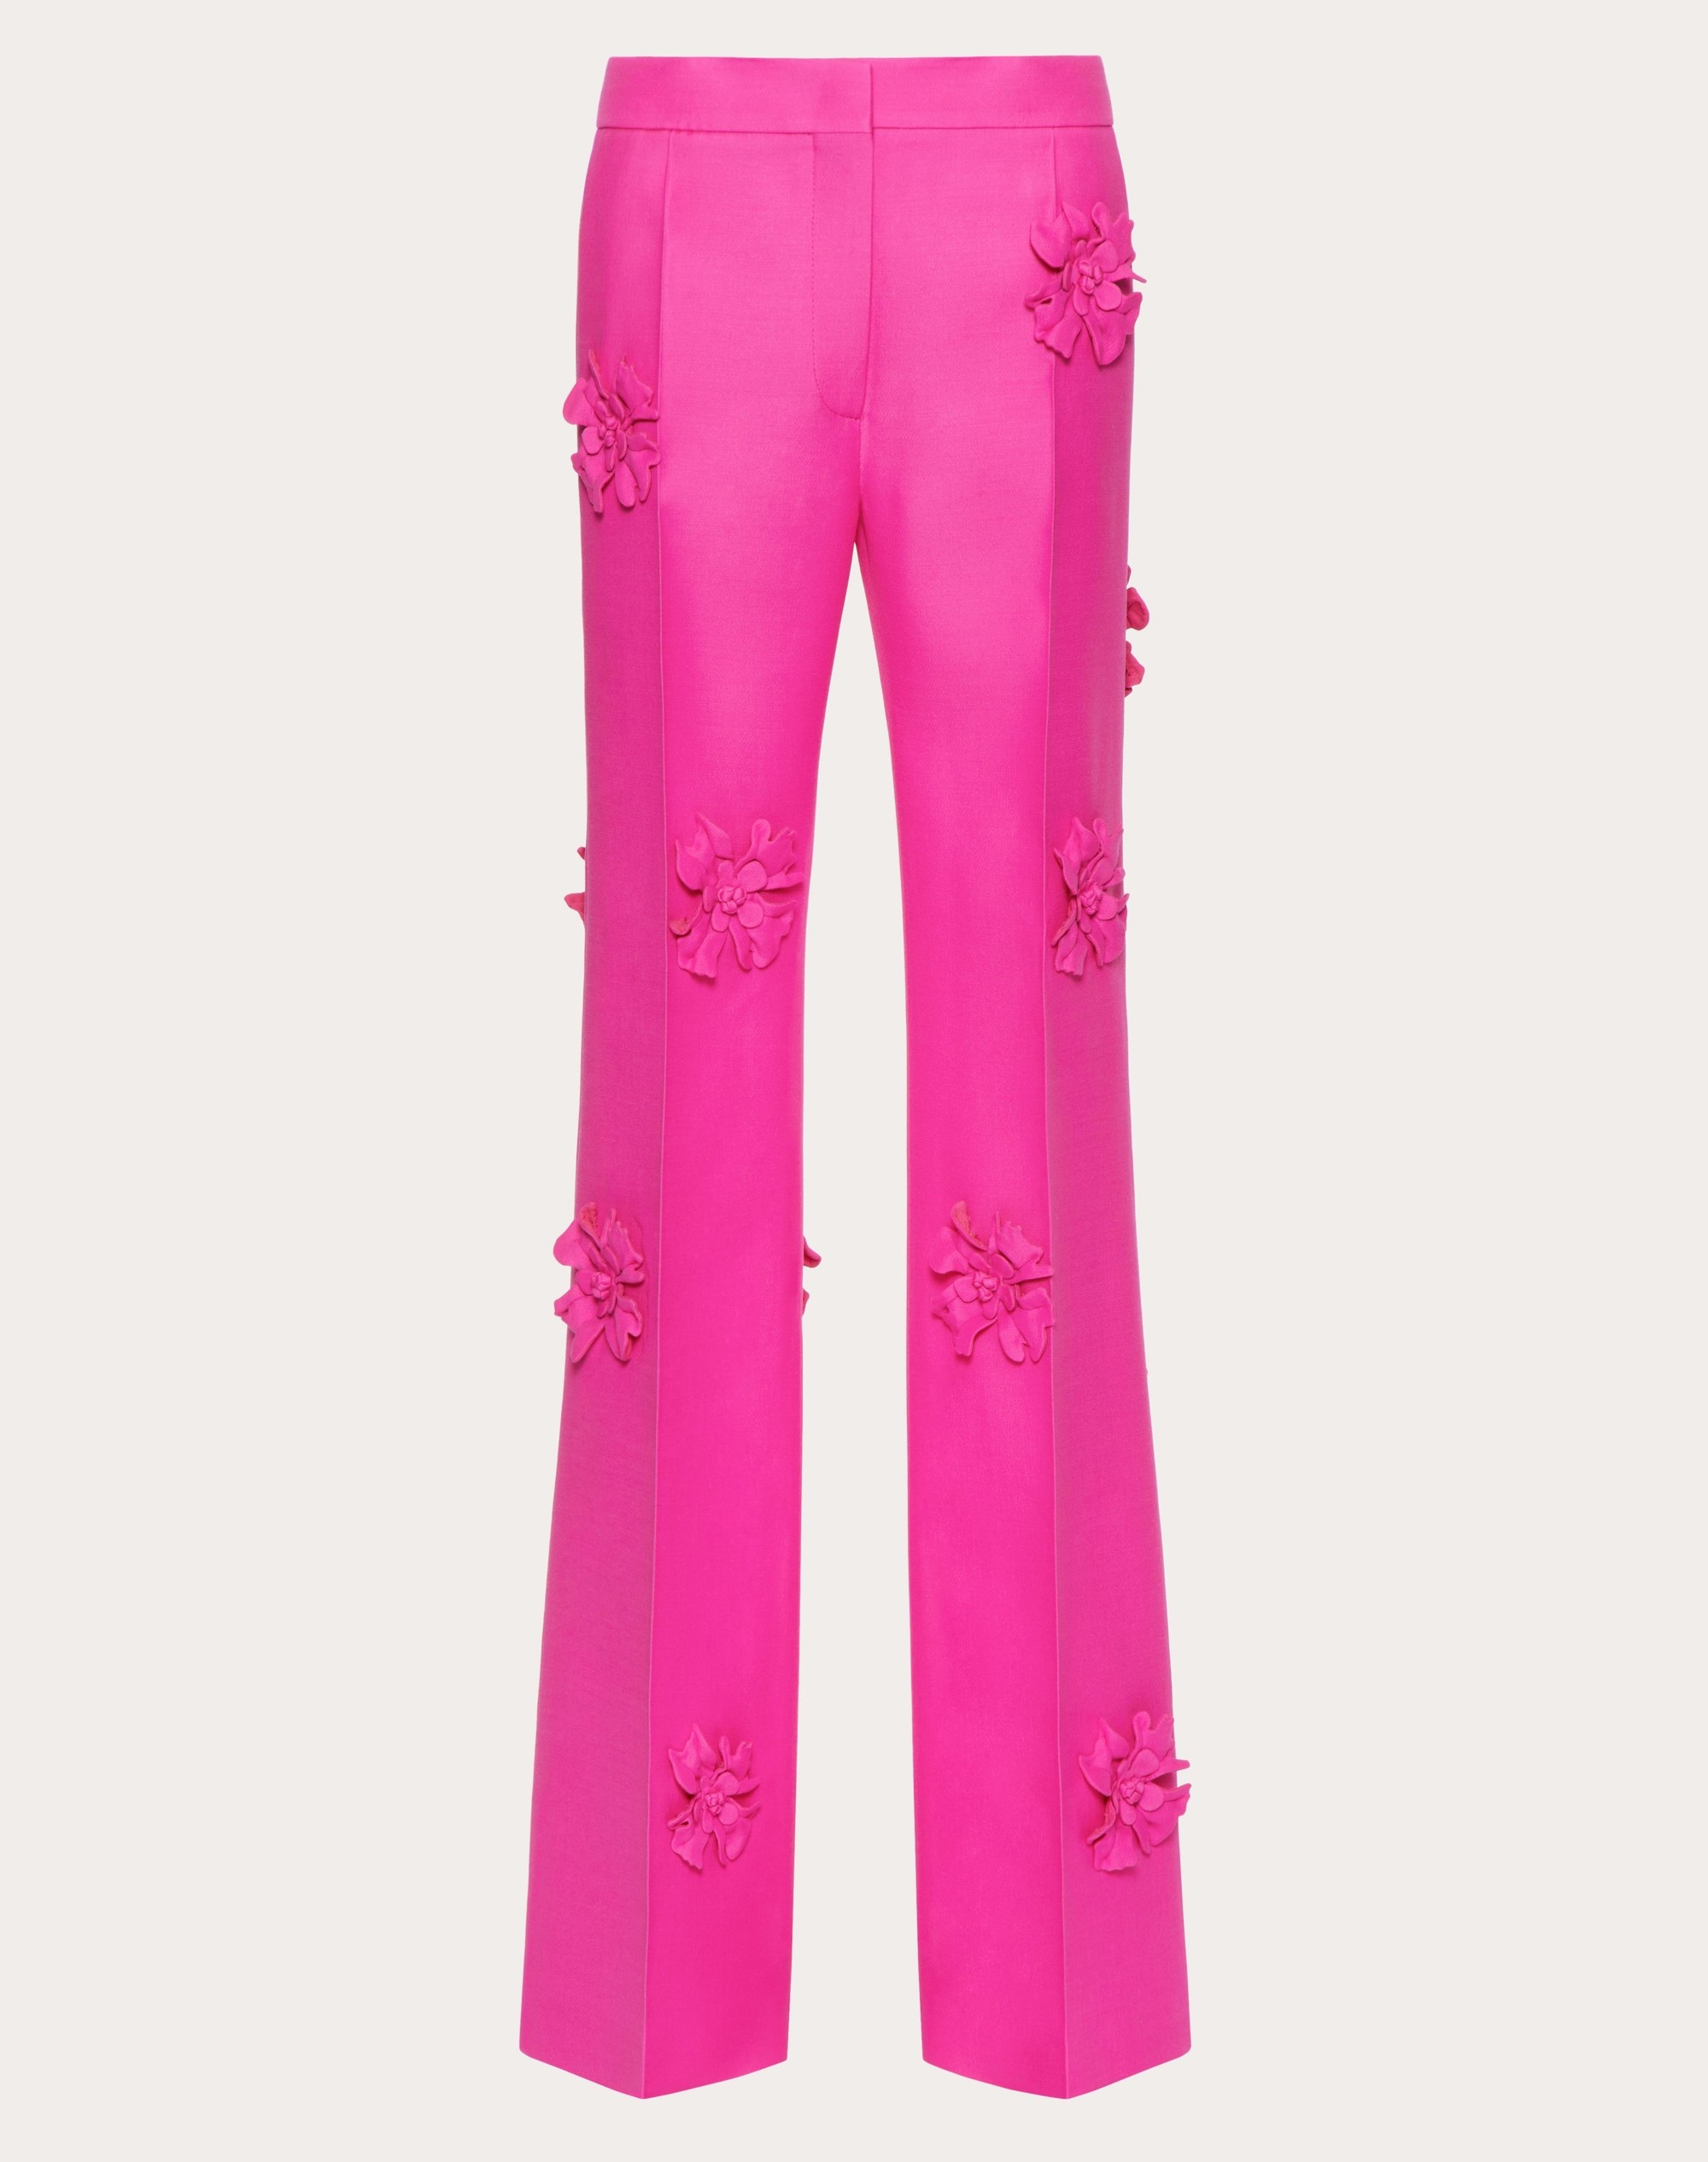 CREPE COUTURE TROUSERS WITH FLORAL EMBROIDERY - 2